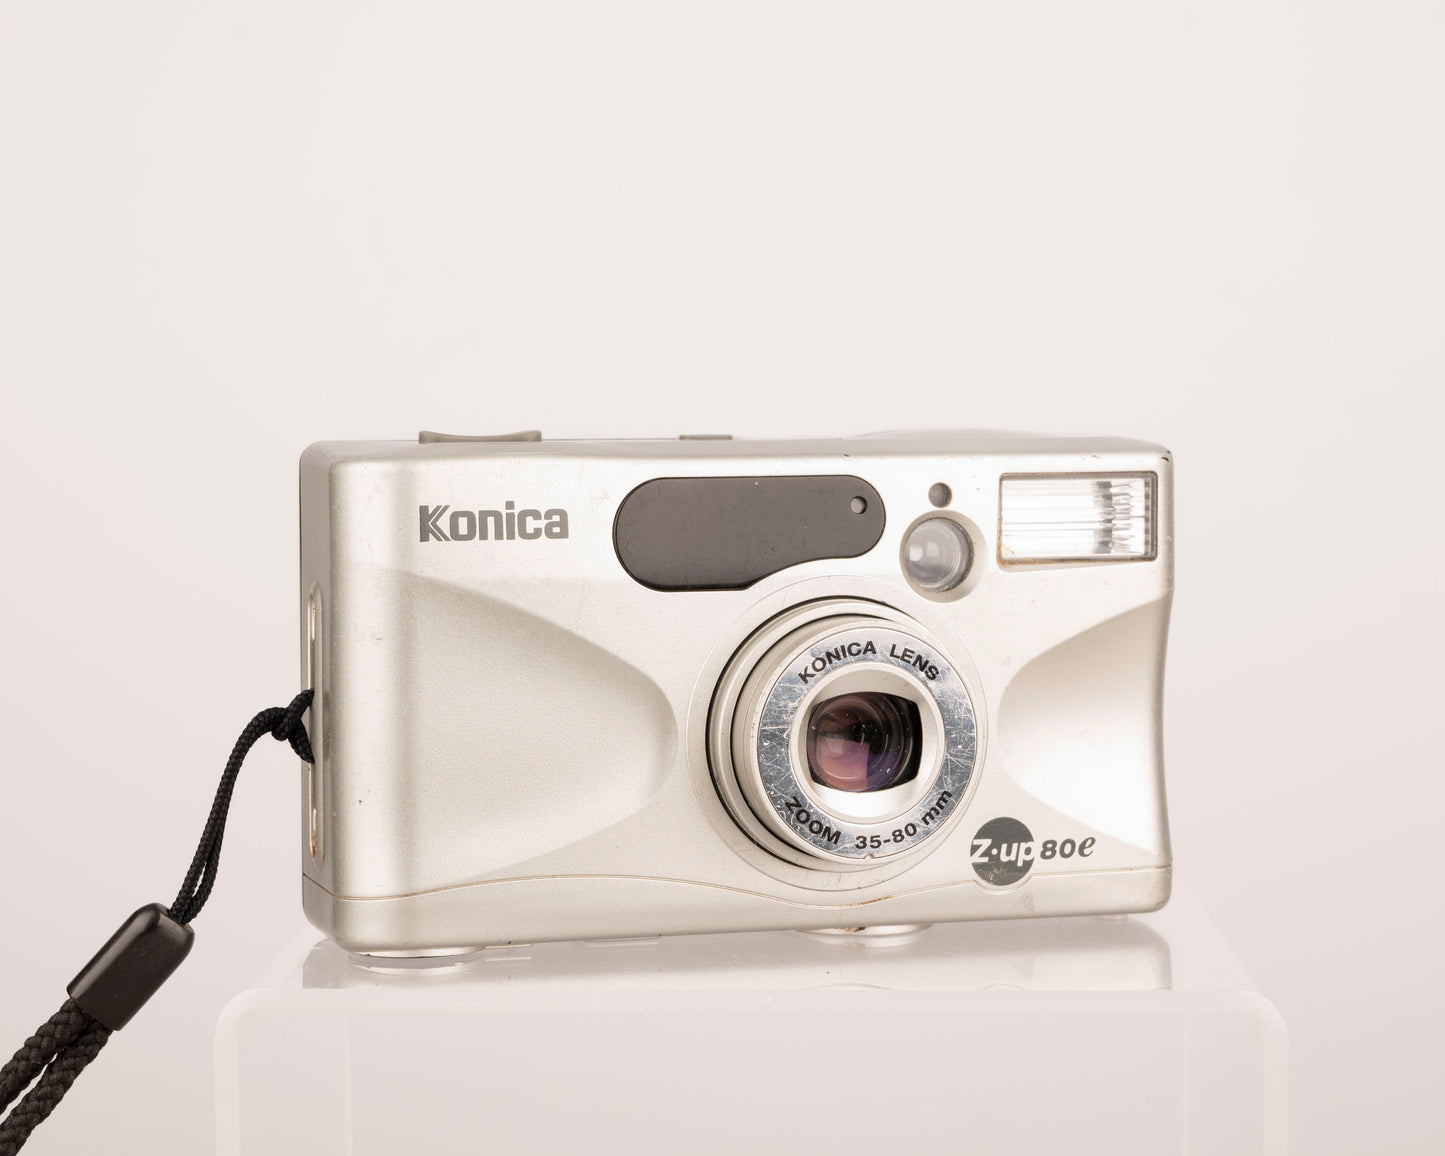 The Konica Z-up 80e is an ultra-compact 35mm point-and-shoot with a 35-80mm zoom lens